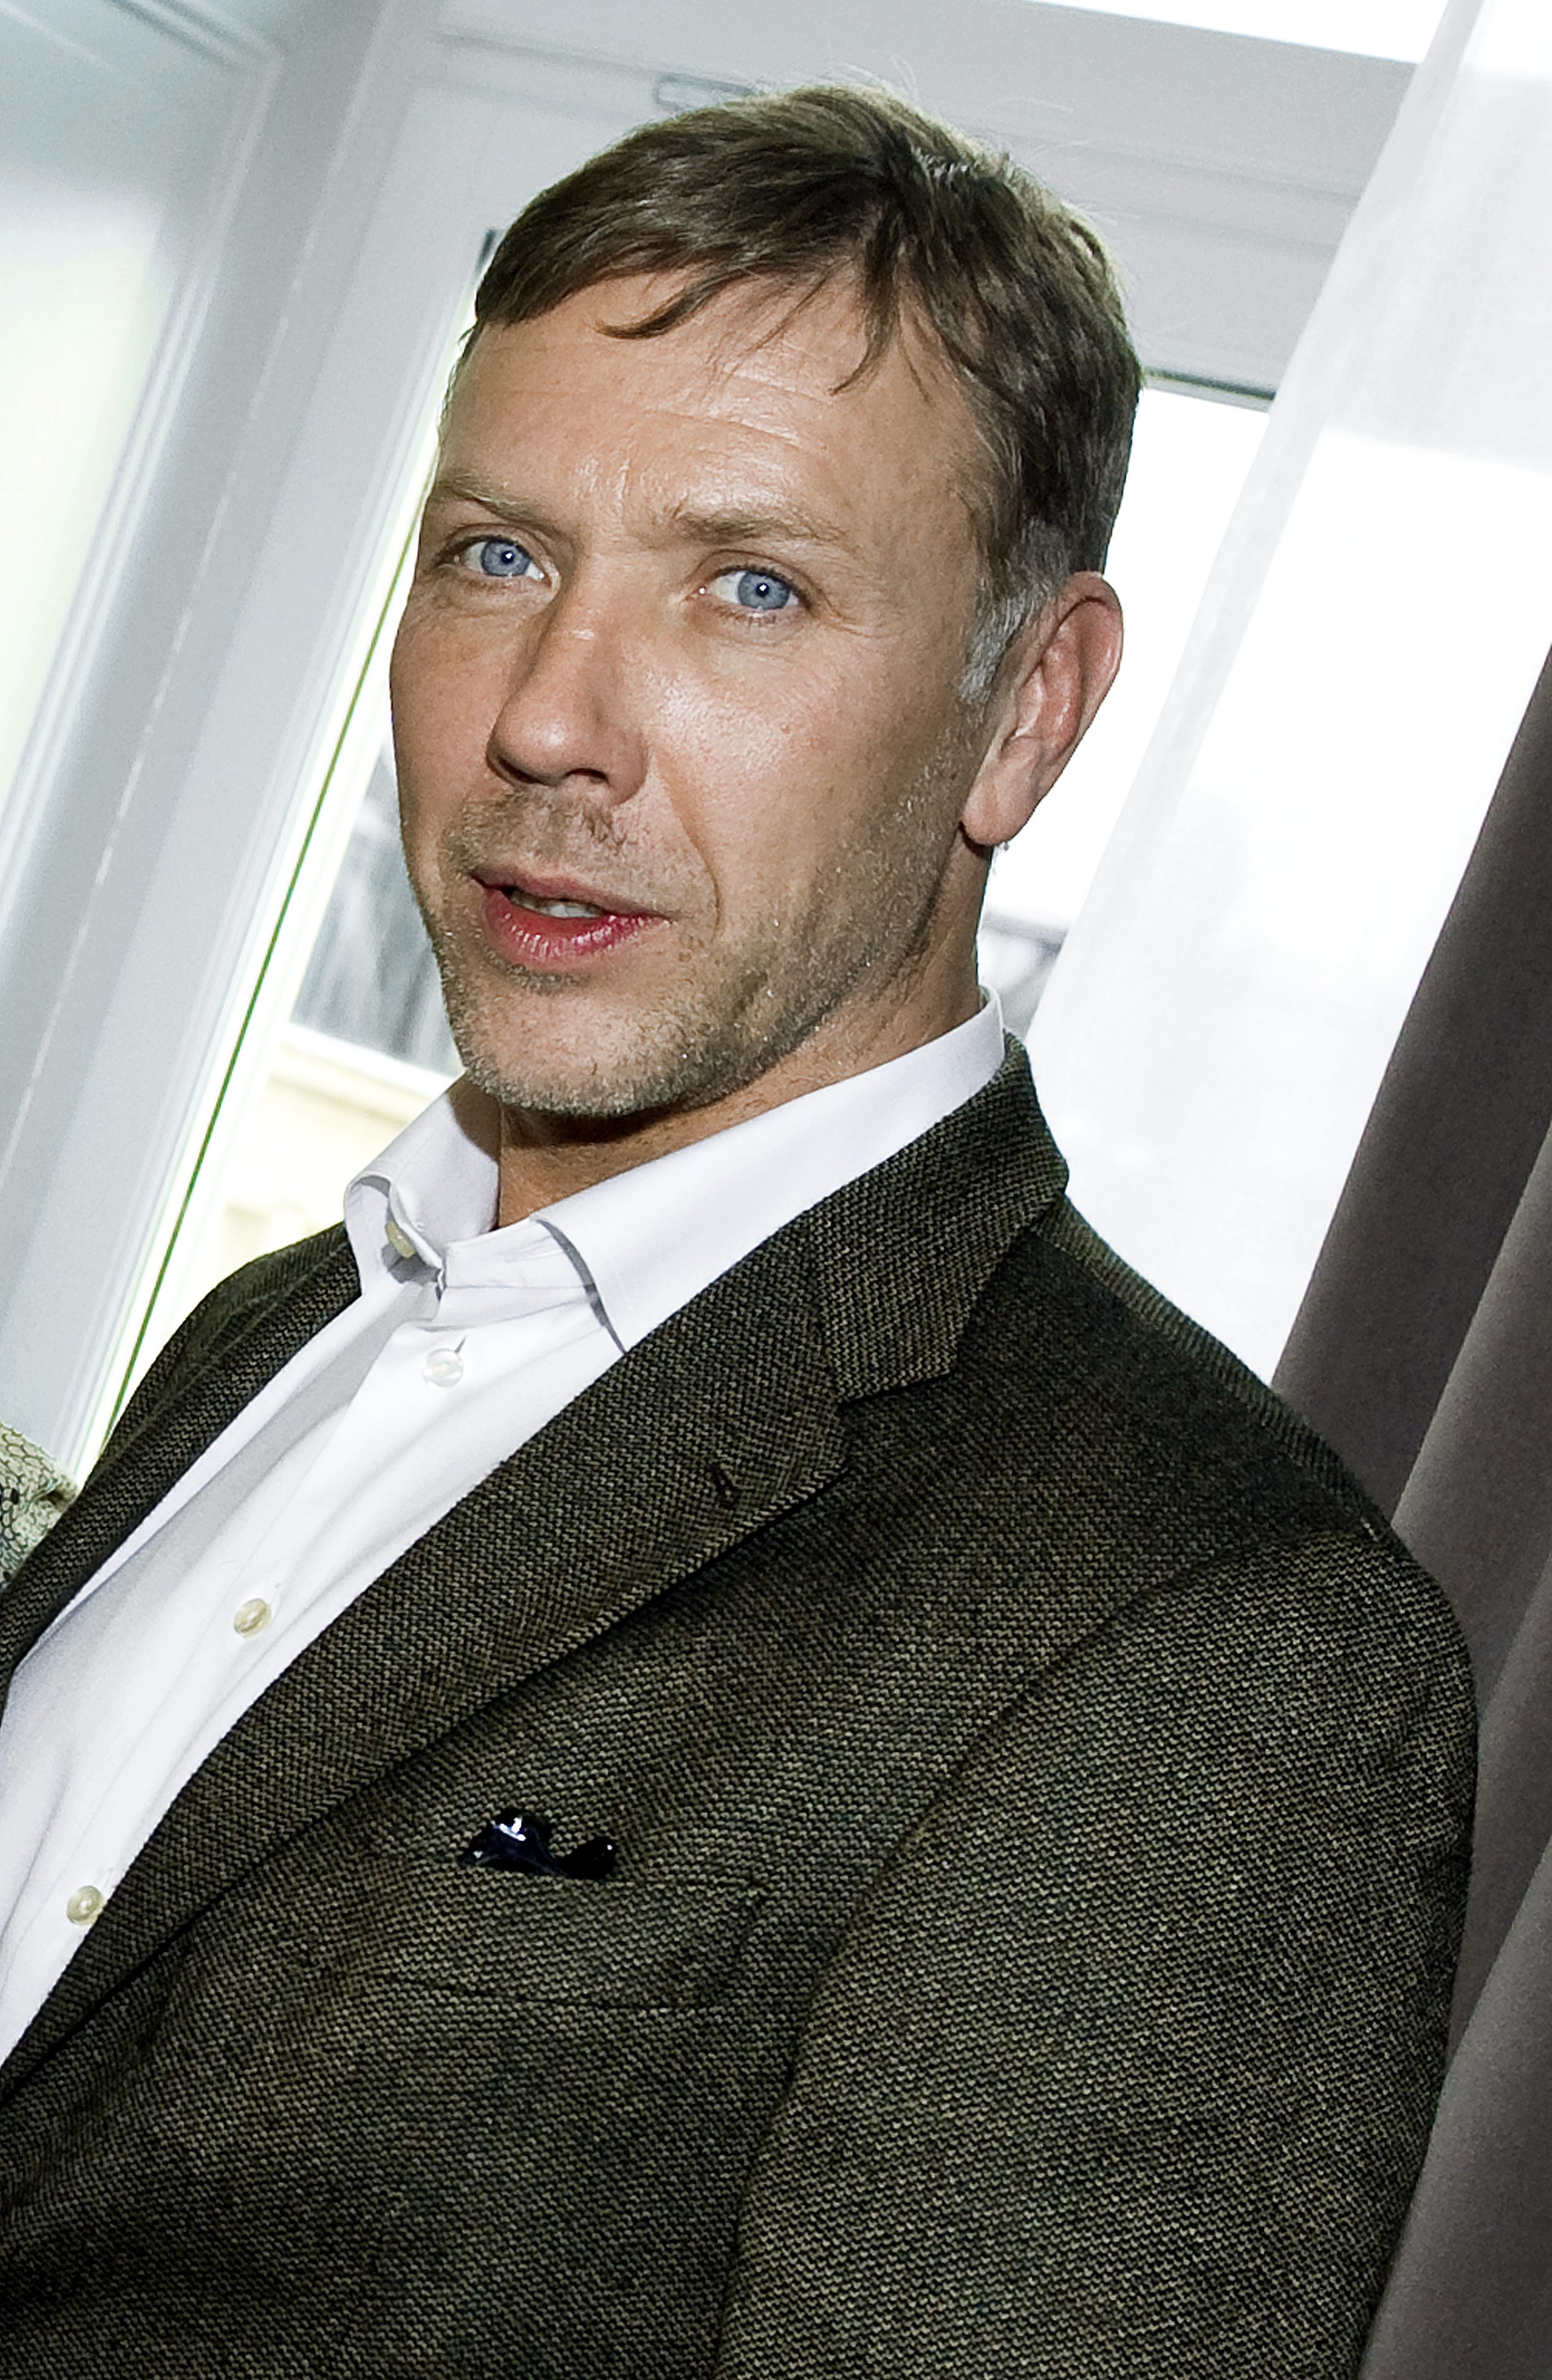 Hollywood, Slåss, Fight, Film, Ola Rapace, Mikael Persbrandt